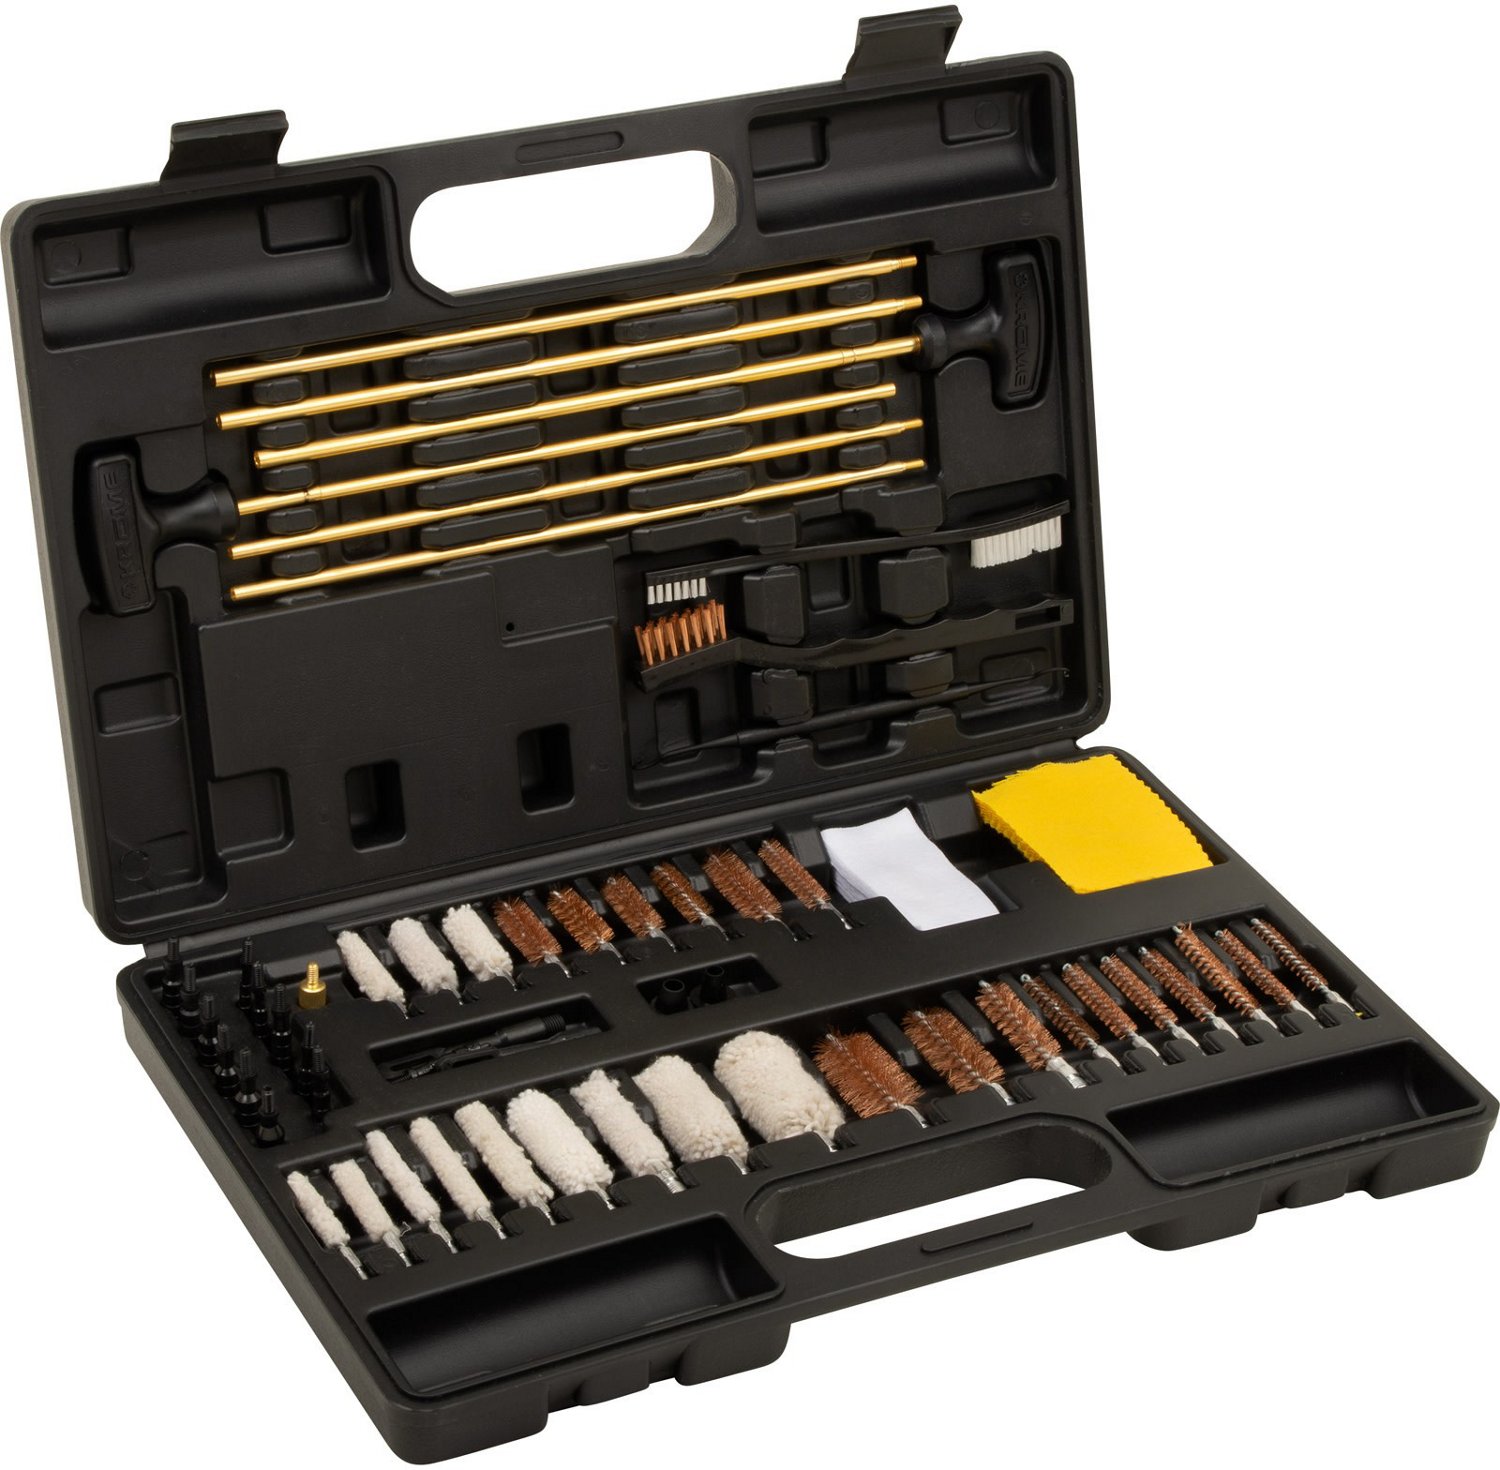 Allen Company Krome Stronghold Universal Gun Cleaning Kit 60 pc. | Academy